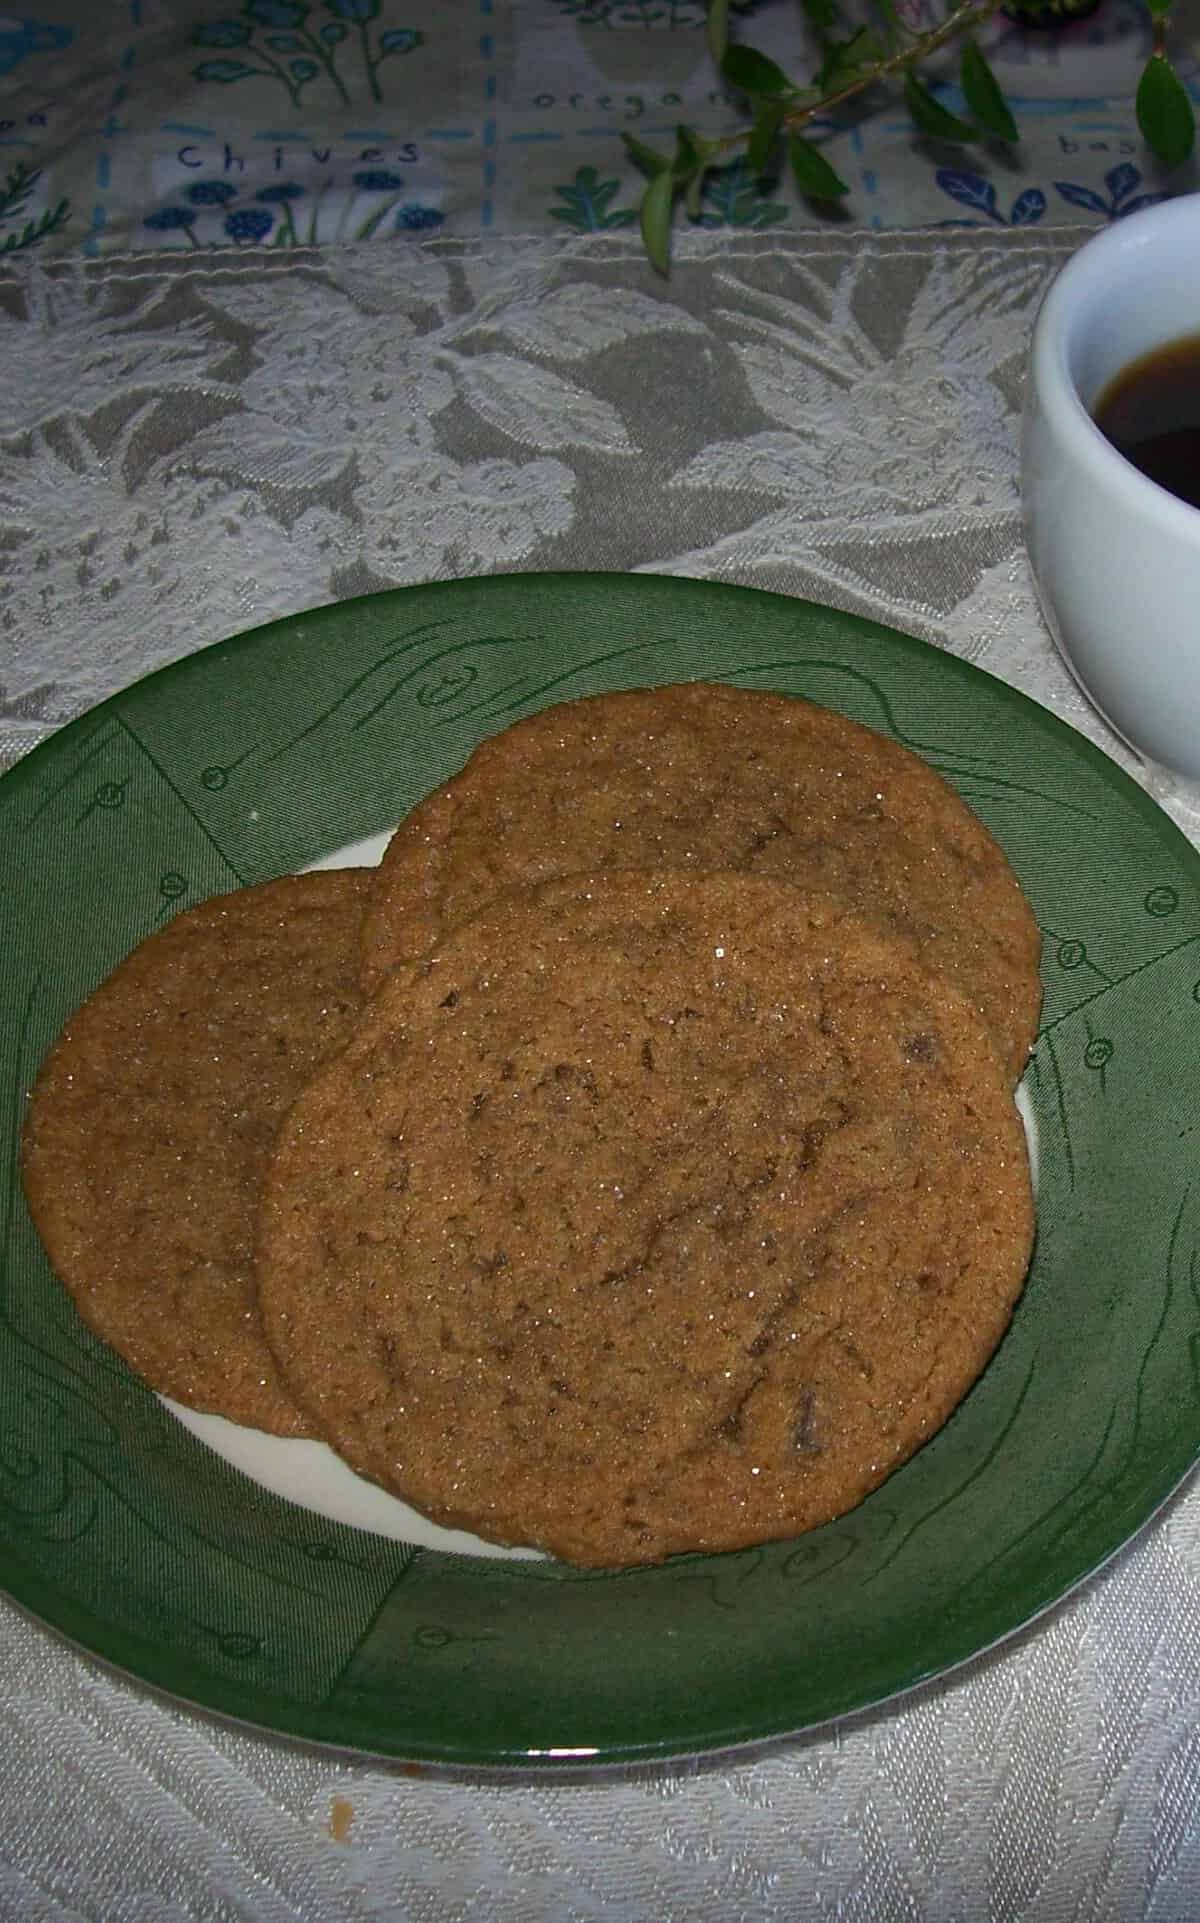  Warm and indulgent cookies, fresh out of the oven!